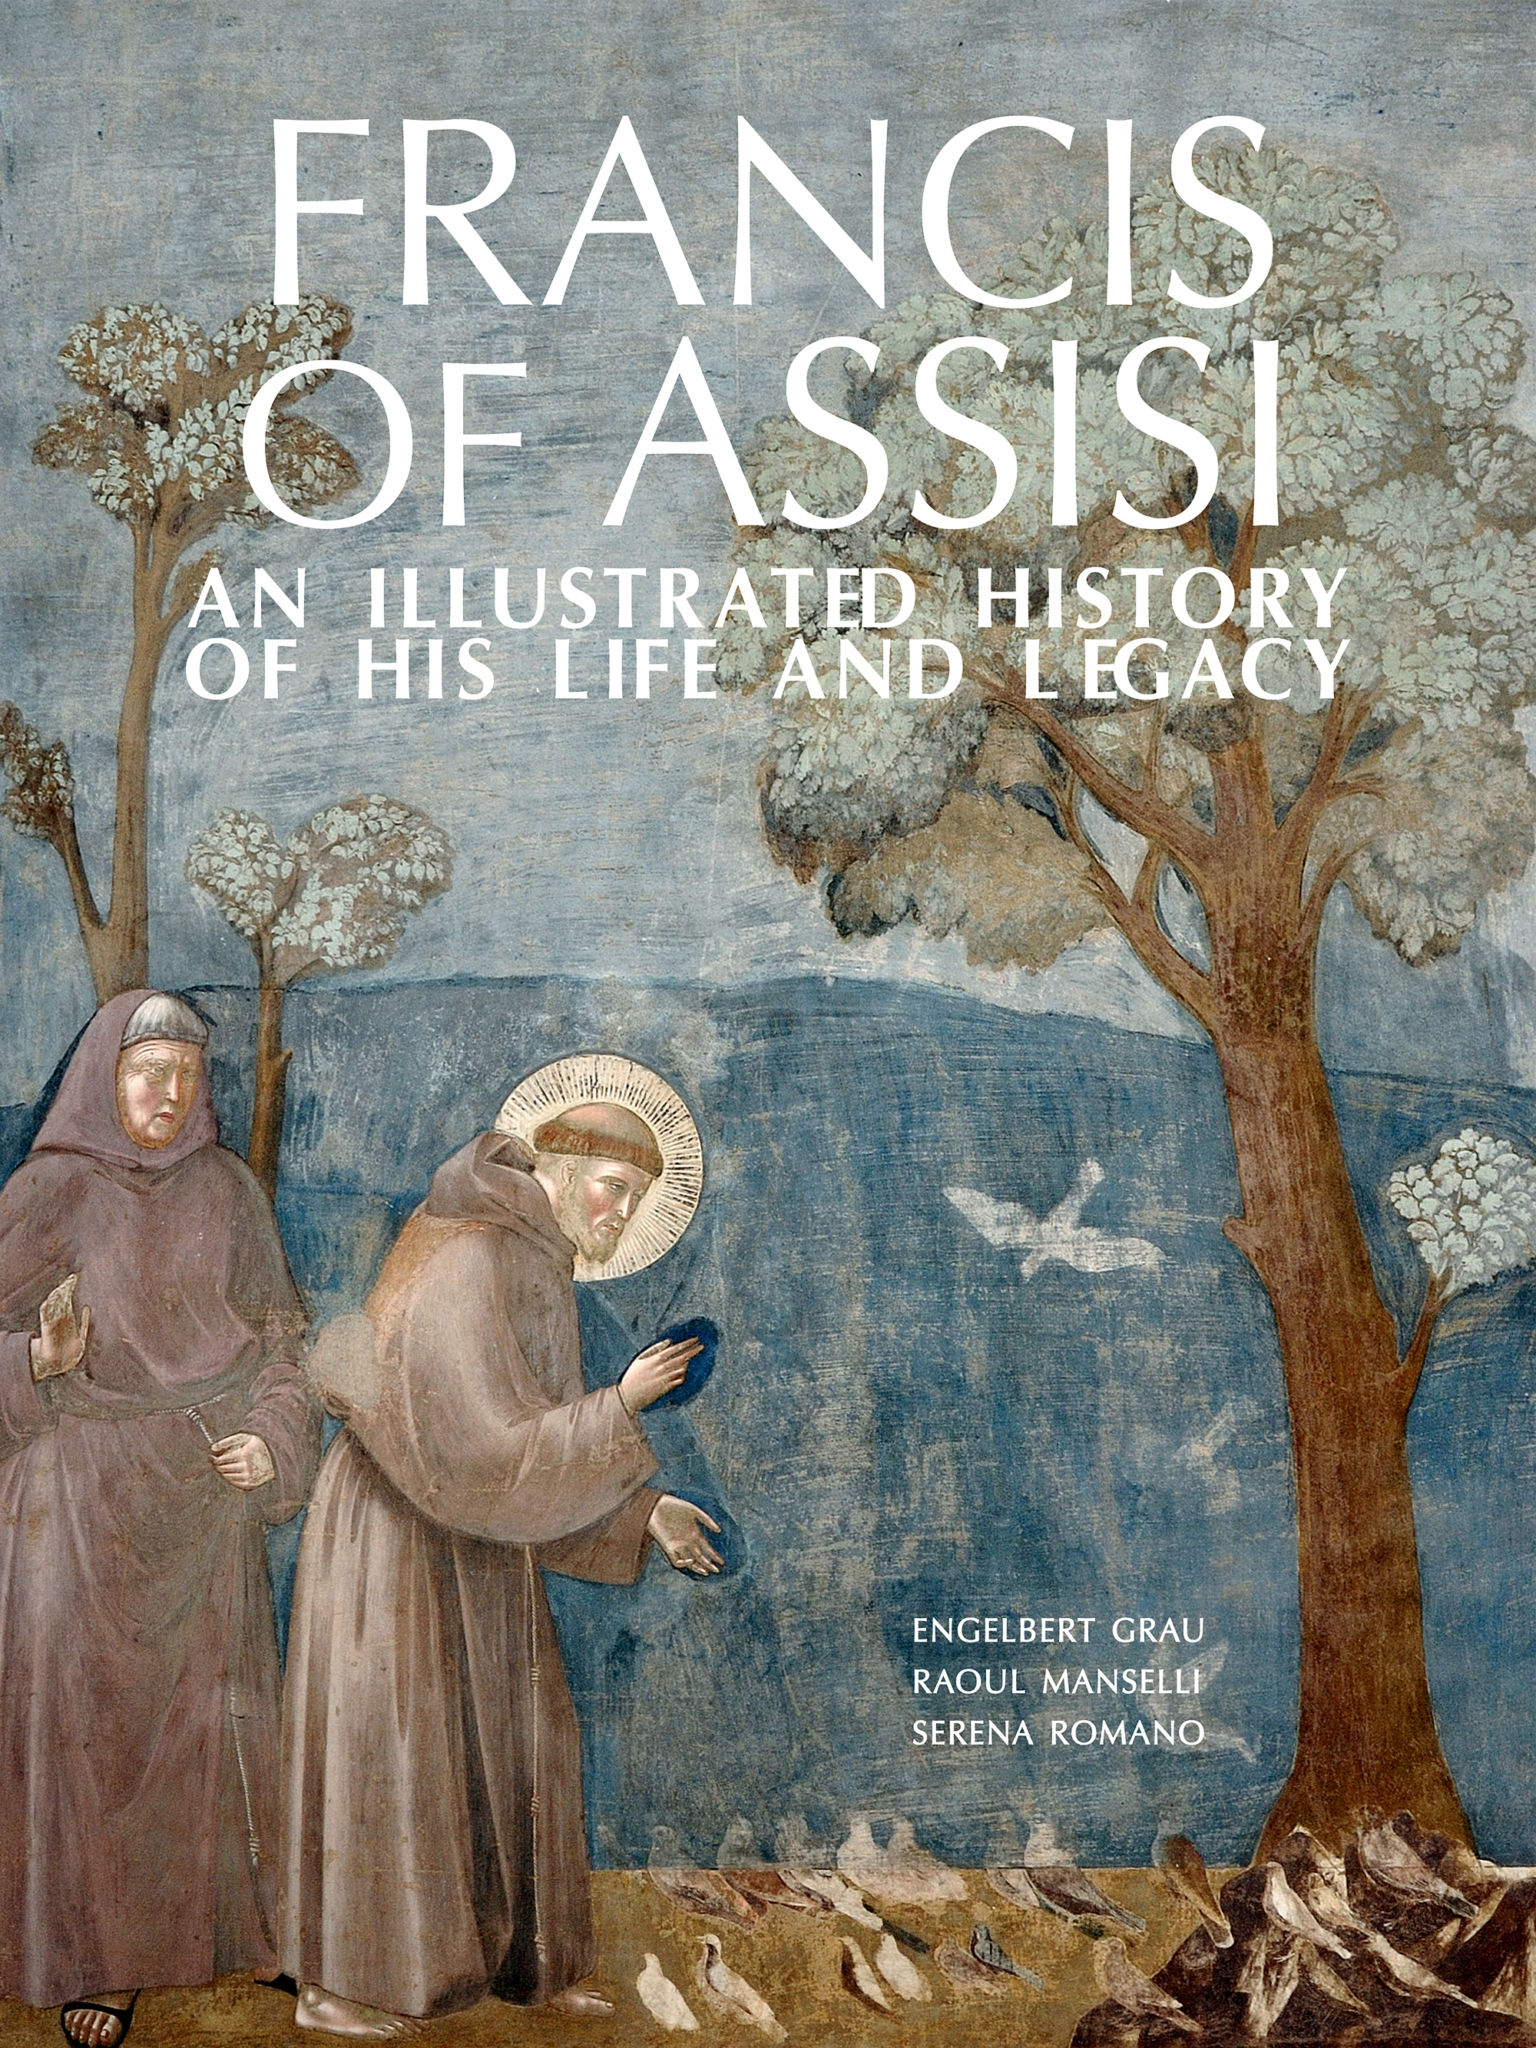 Francis of Assisi - An Illustrated History of His Life and Legacy